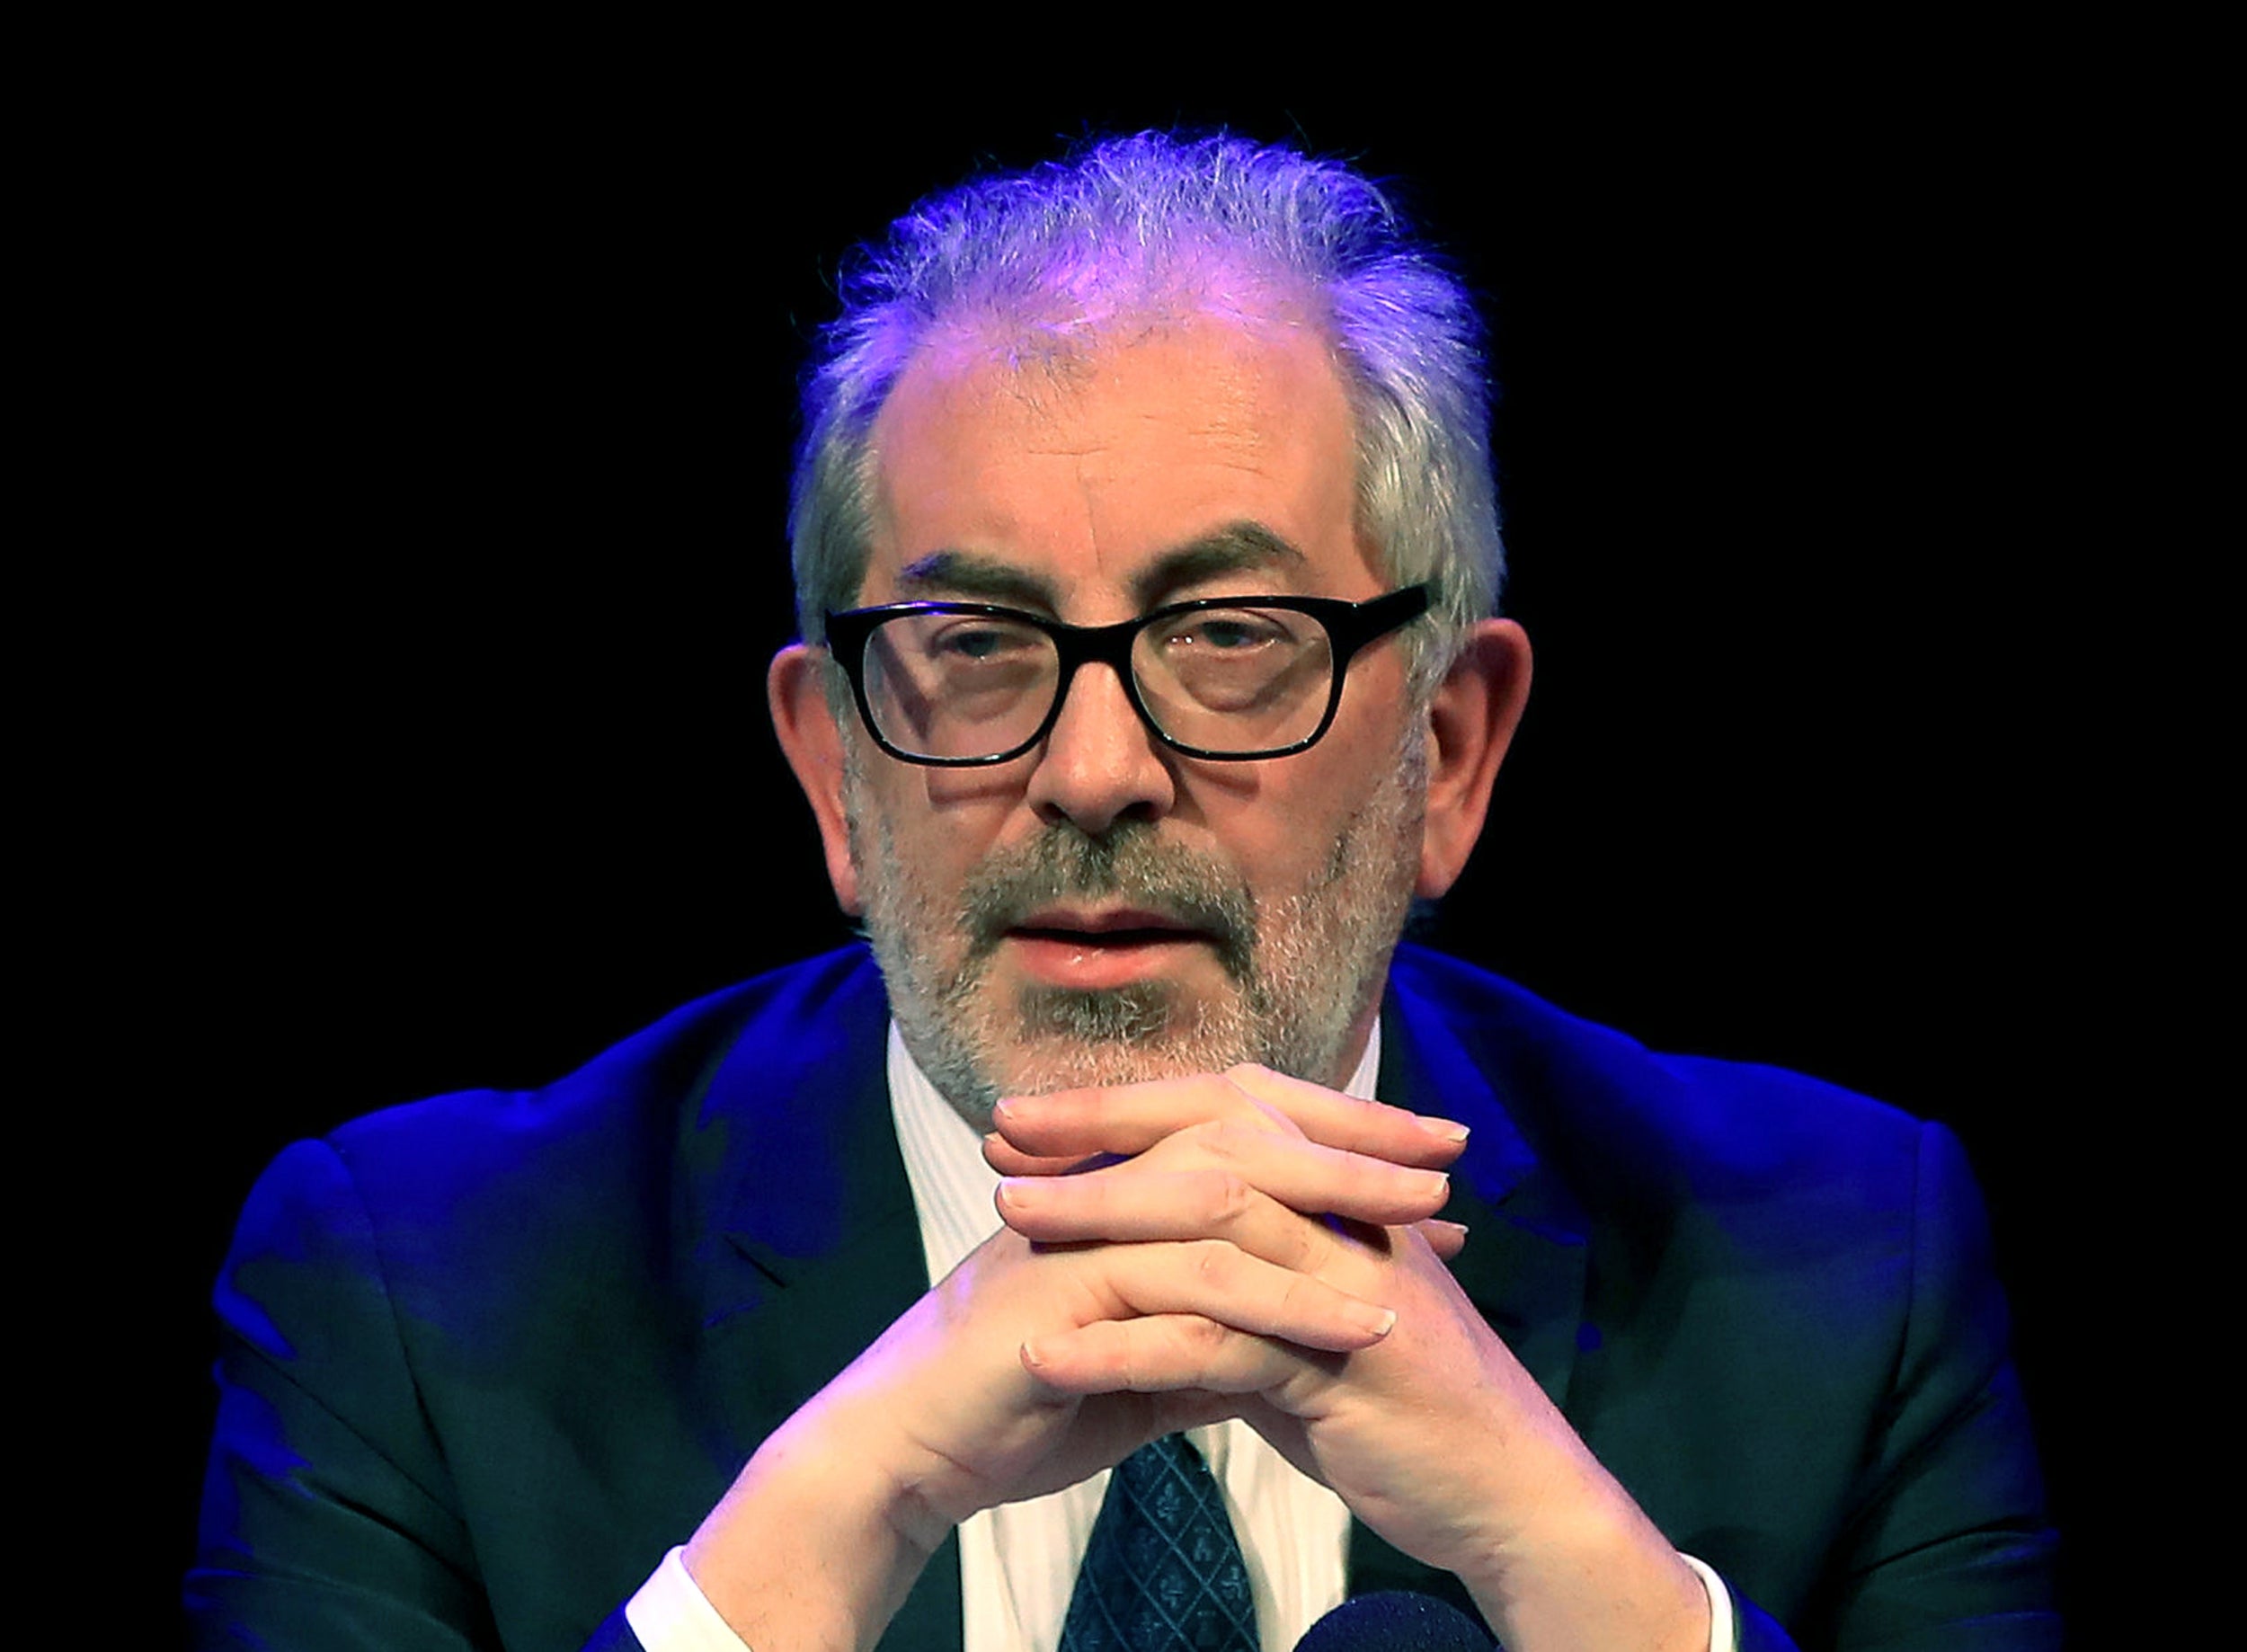 The commission is led by former civil service head Lord Bob Kerslake